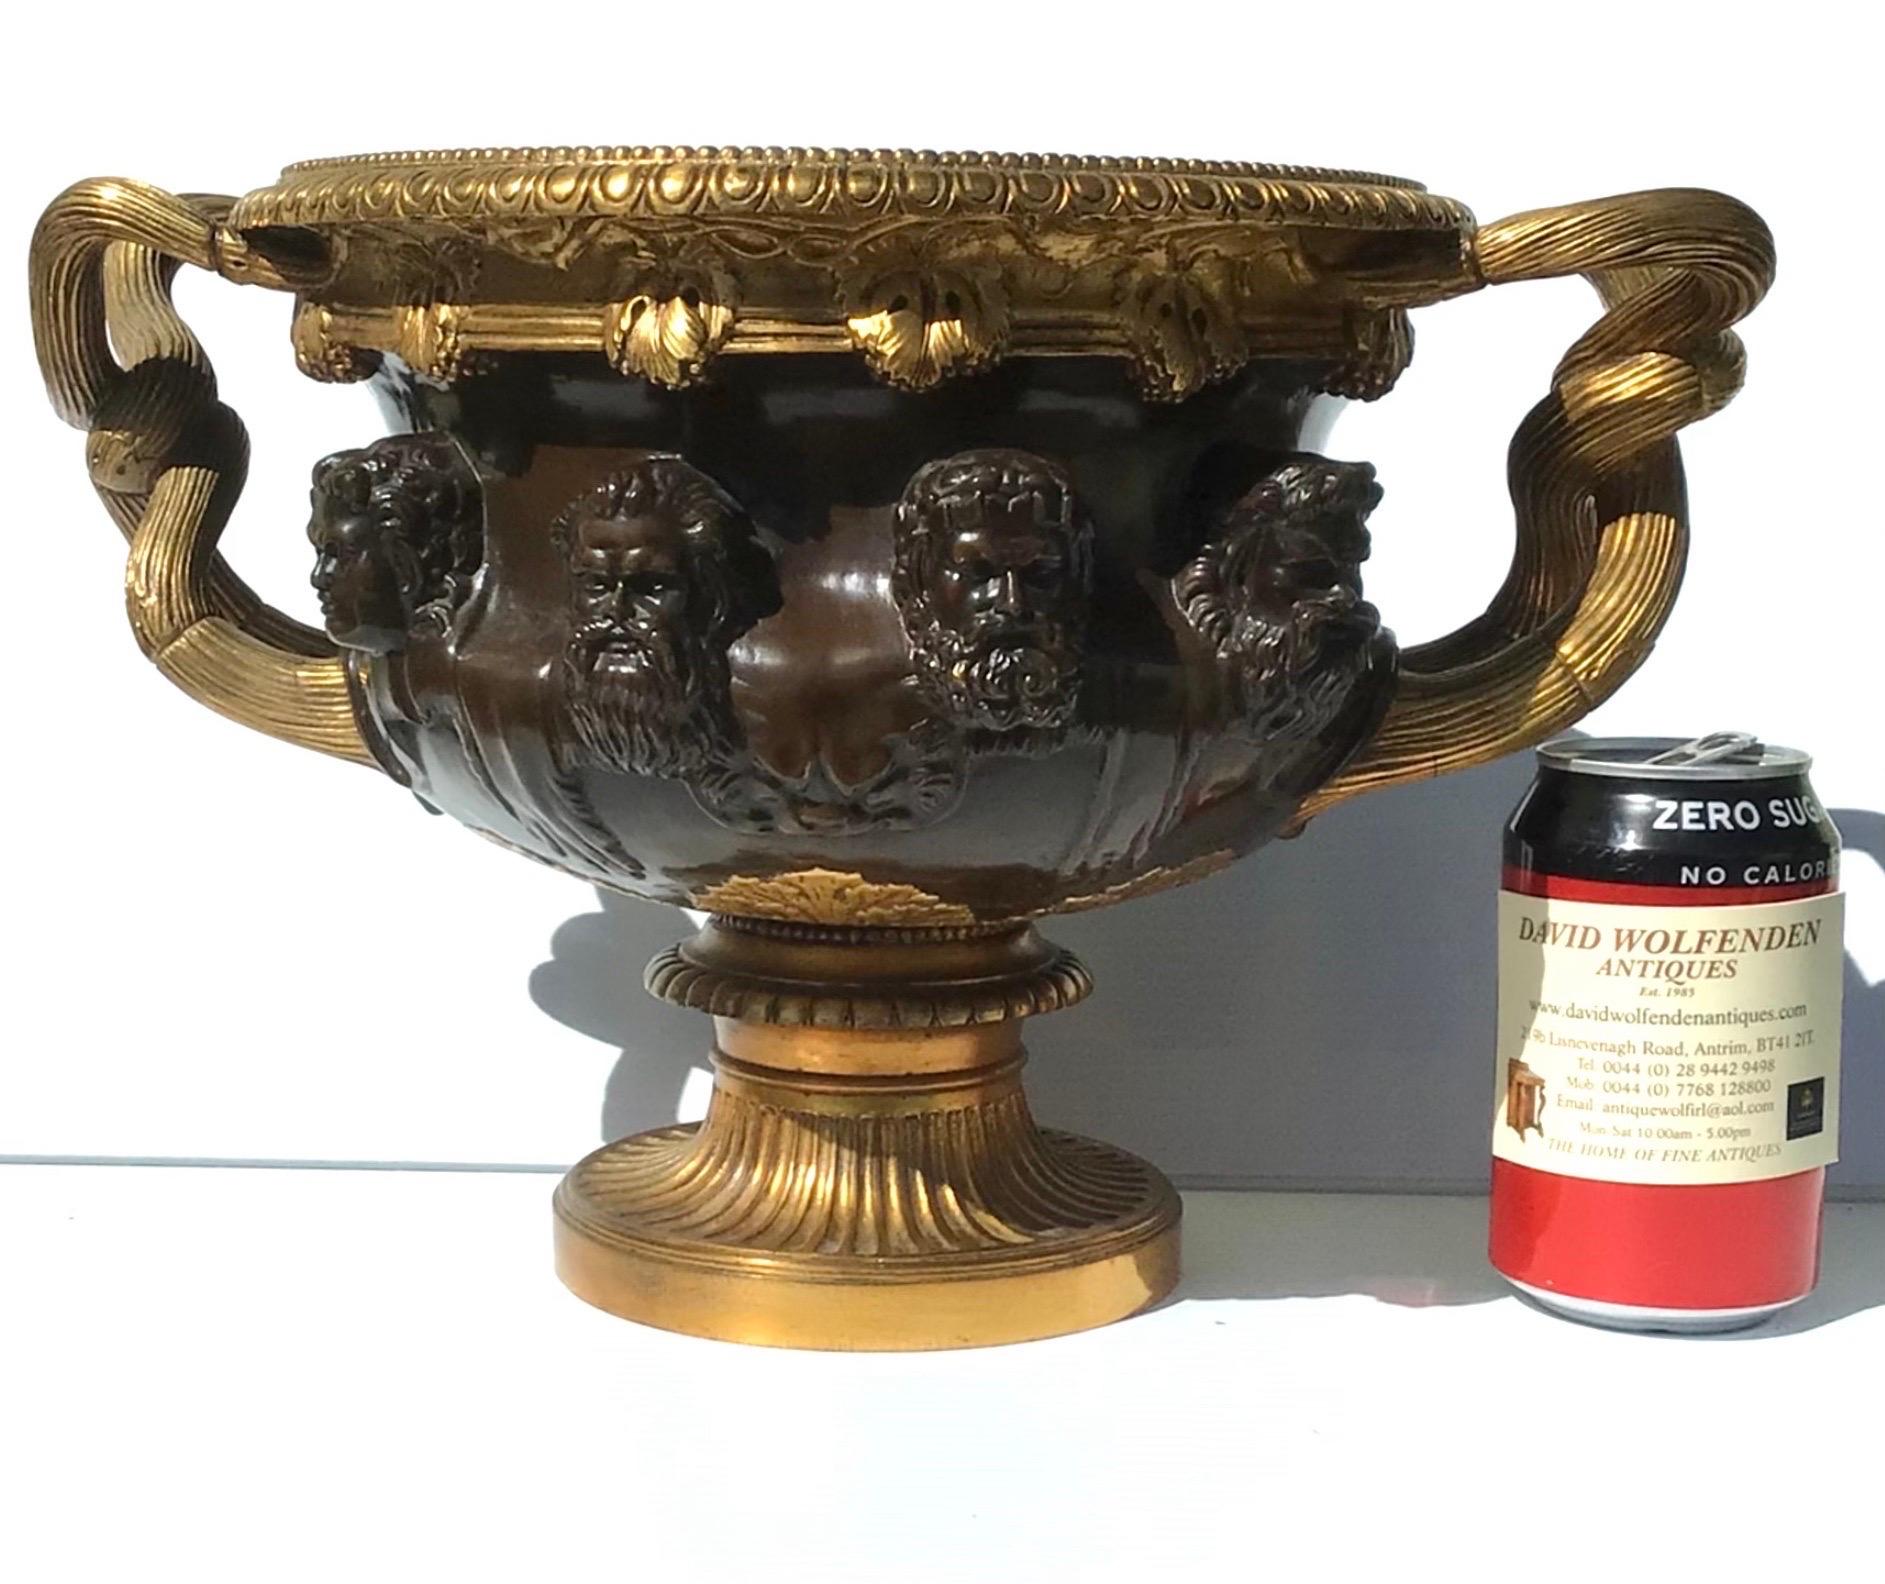 Fabulous large gilted bronze 'Warwick' vase by Barbedienne, Paris circa 1860, modelled after the original the masks between the entwined vine handles, egg and dart rim with grapevine decoration, on a round gilt bronze pedestal. 

Measures: 33cm x